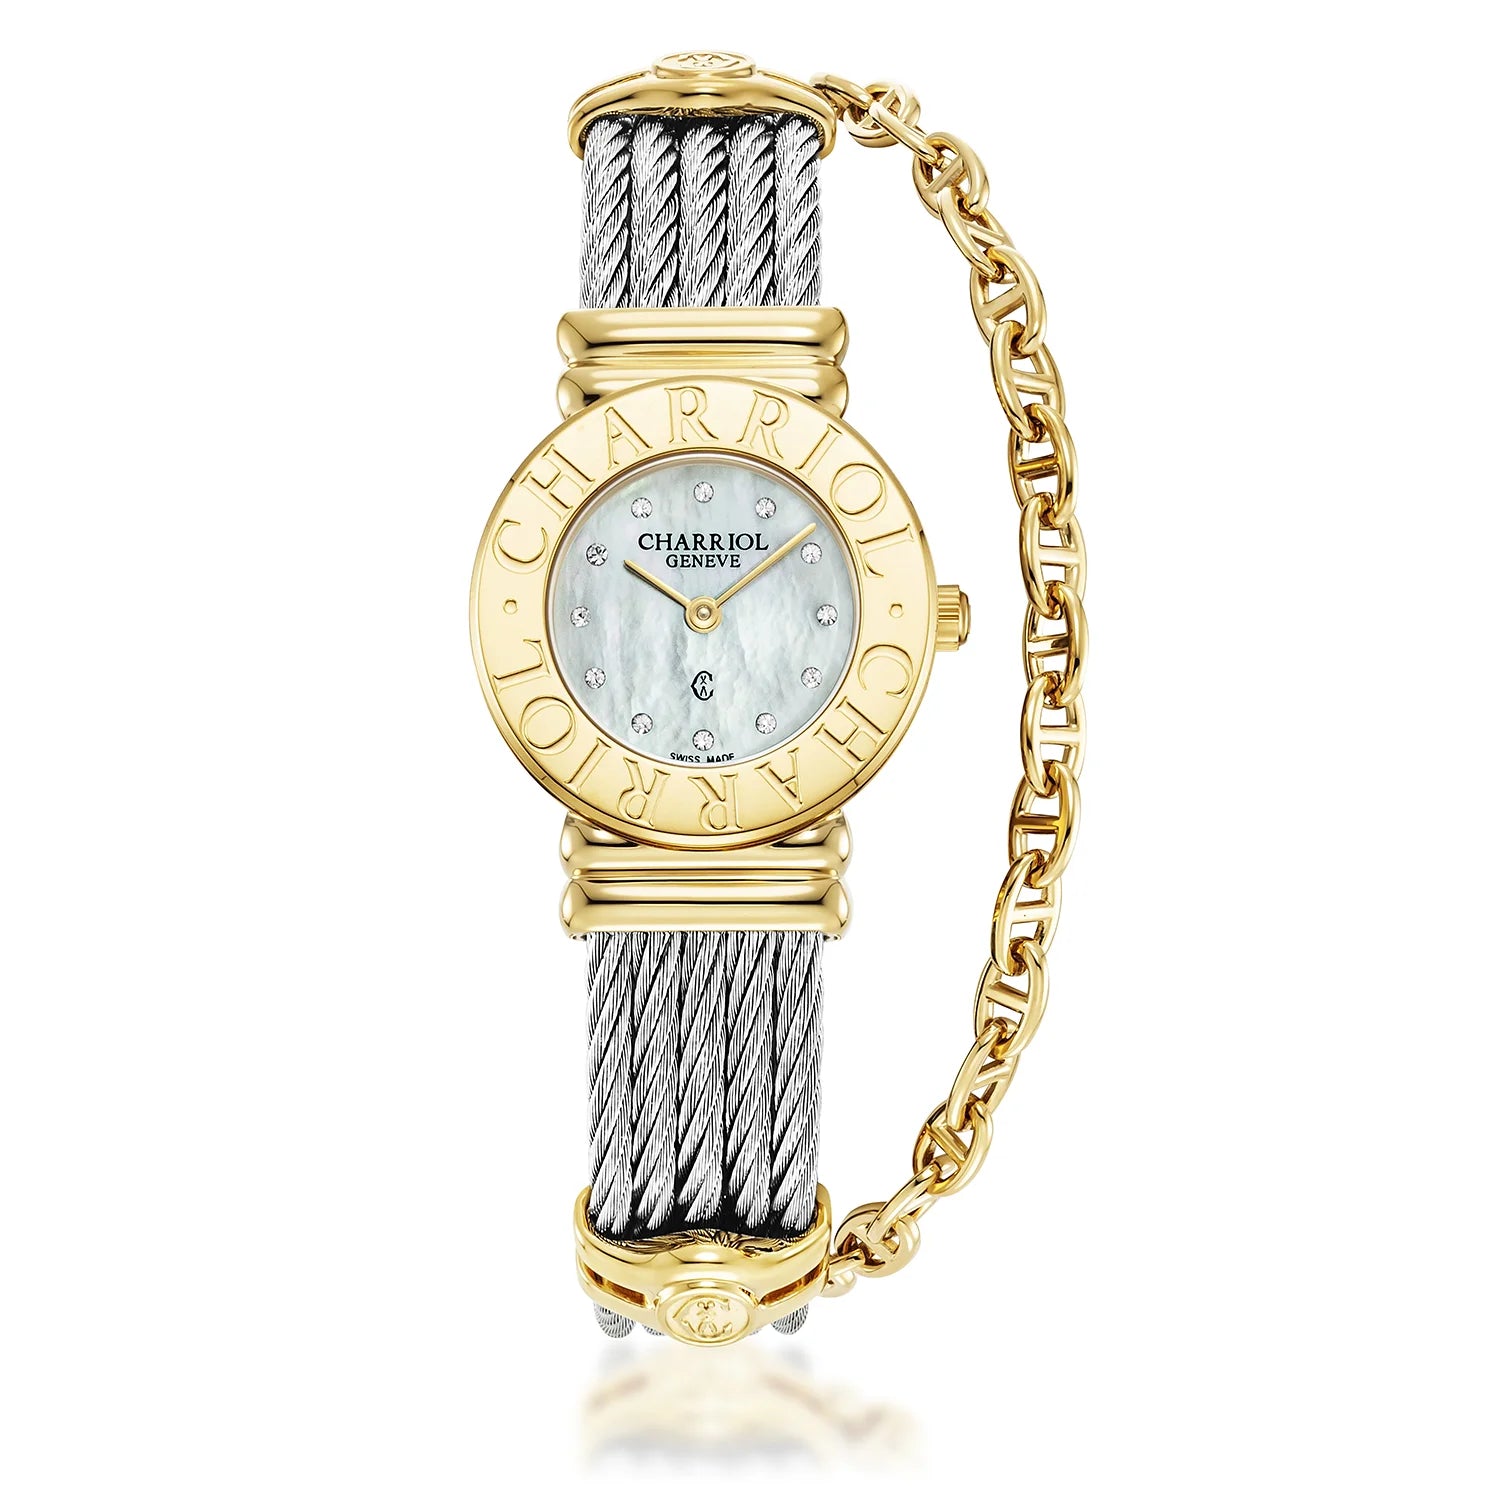 St Tropez Icon 24.5mm Watch Yellow Gold, Steel Cable, Charriol Bezel and 12 Diamonds White MOP Dial - Charriol Geneve -  Watch